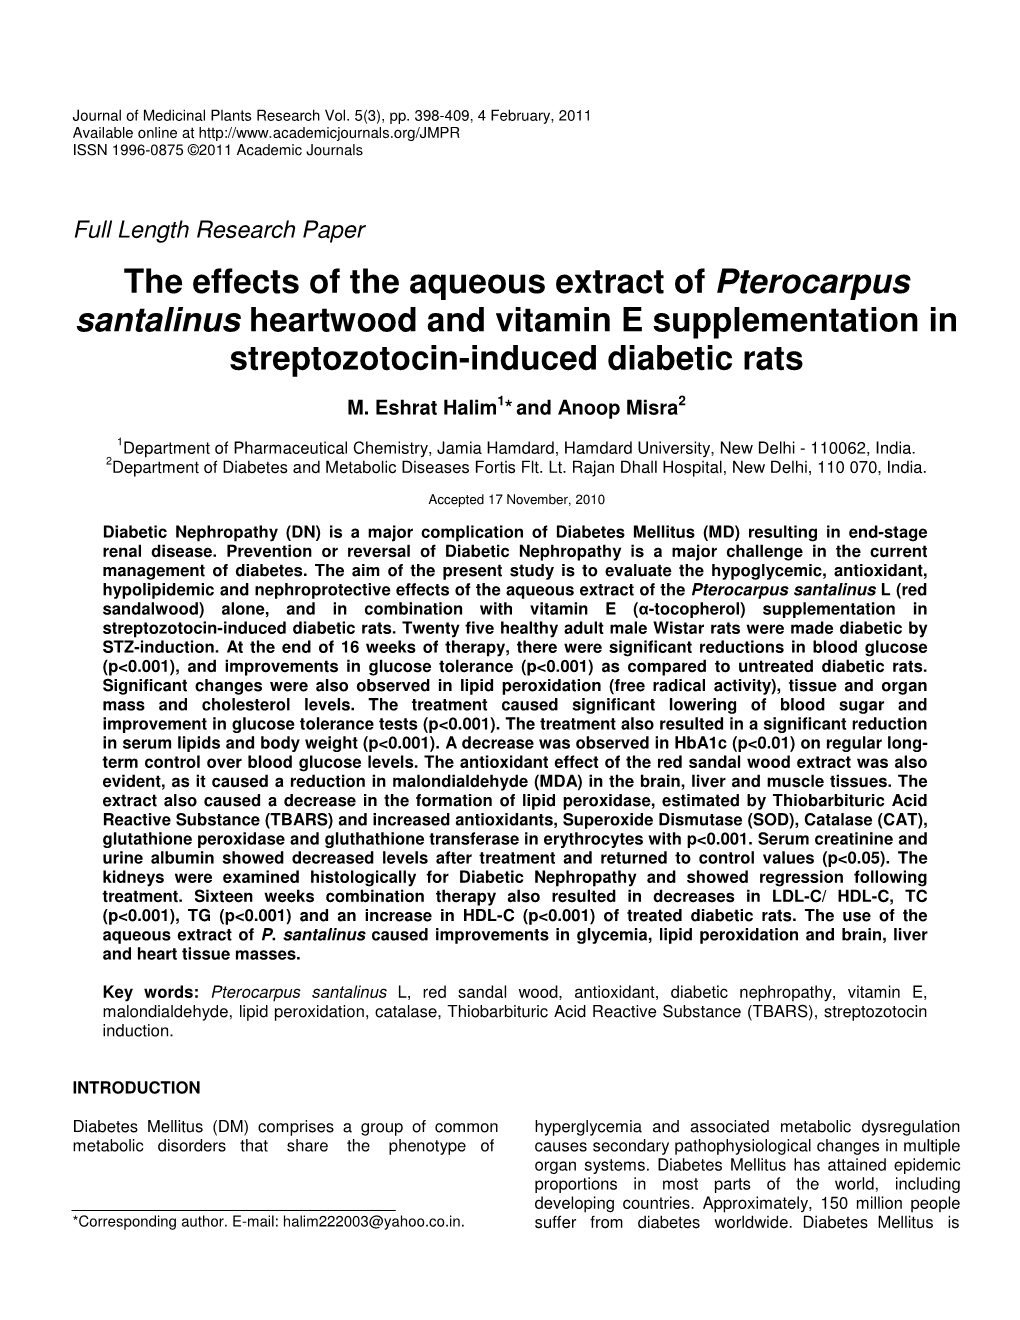 The Effects of the Aqueous Extract of Pterocarpus Santalinus Heartwood and Vitamin E Supplementation in Streptozotocin-Induced Diabetic Rats